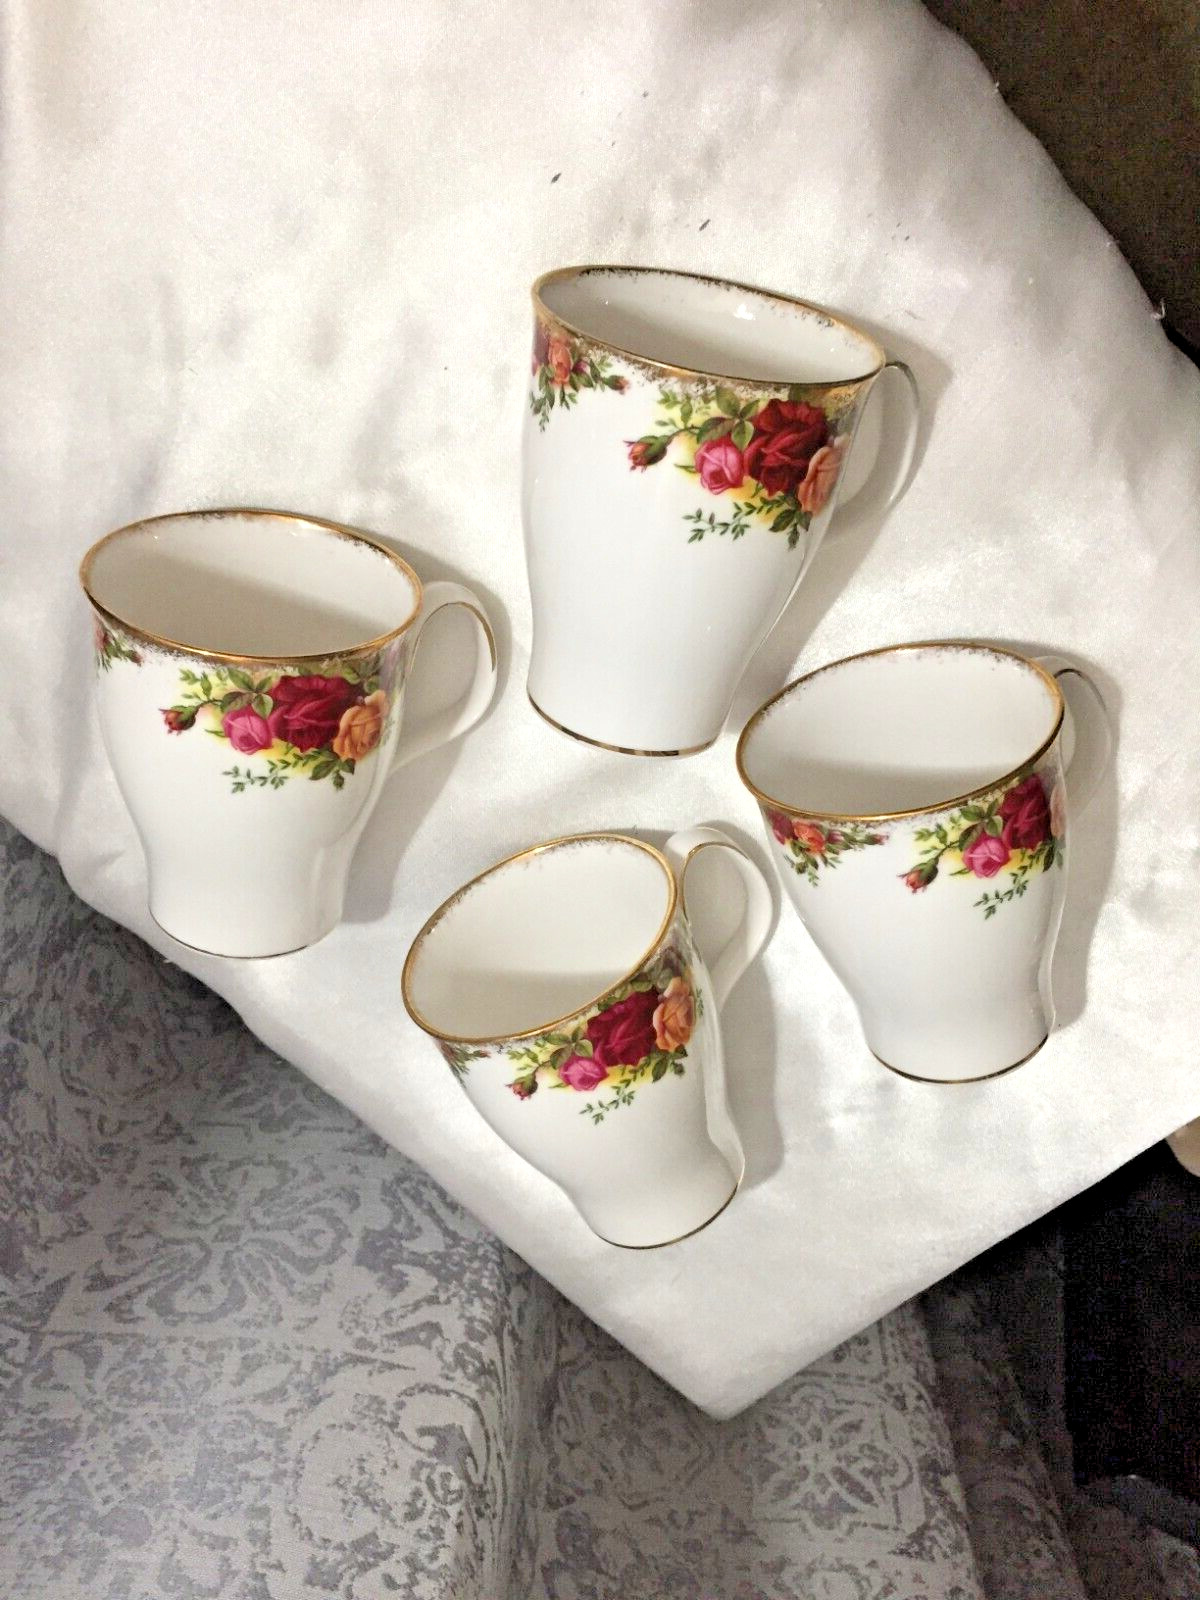 Royal Albert Old Country Roses Set of 4 Coffee Mugs 4.25 Tall England